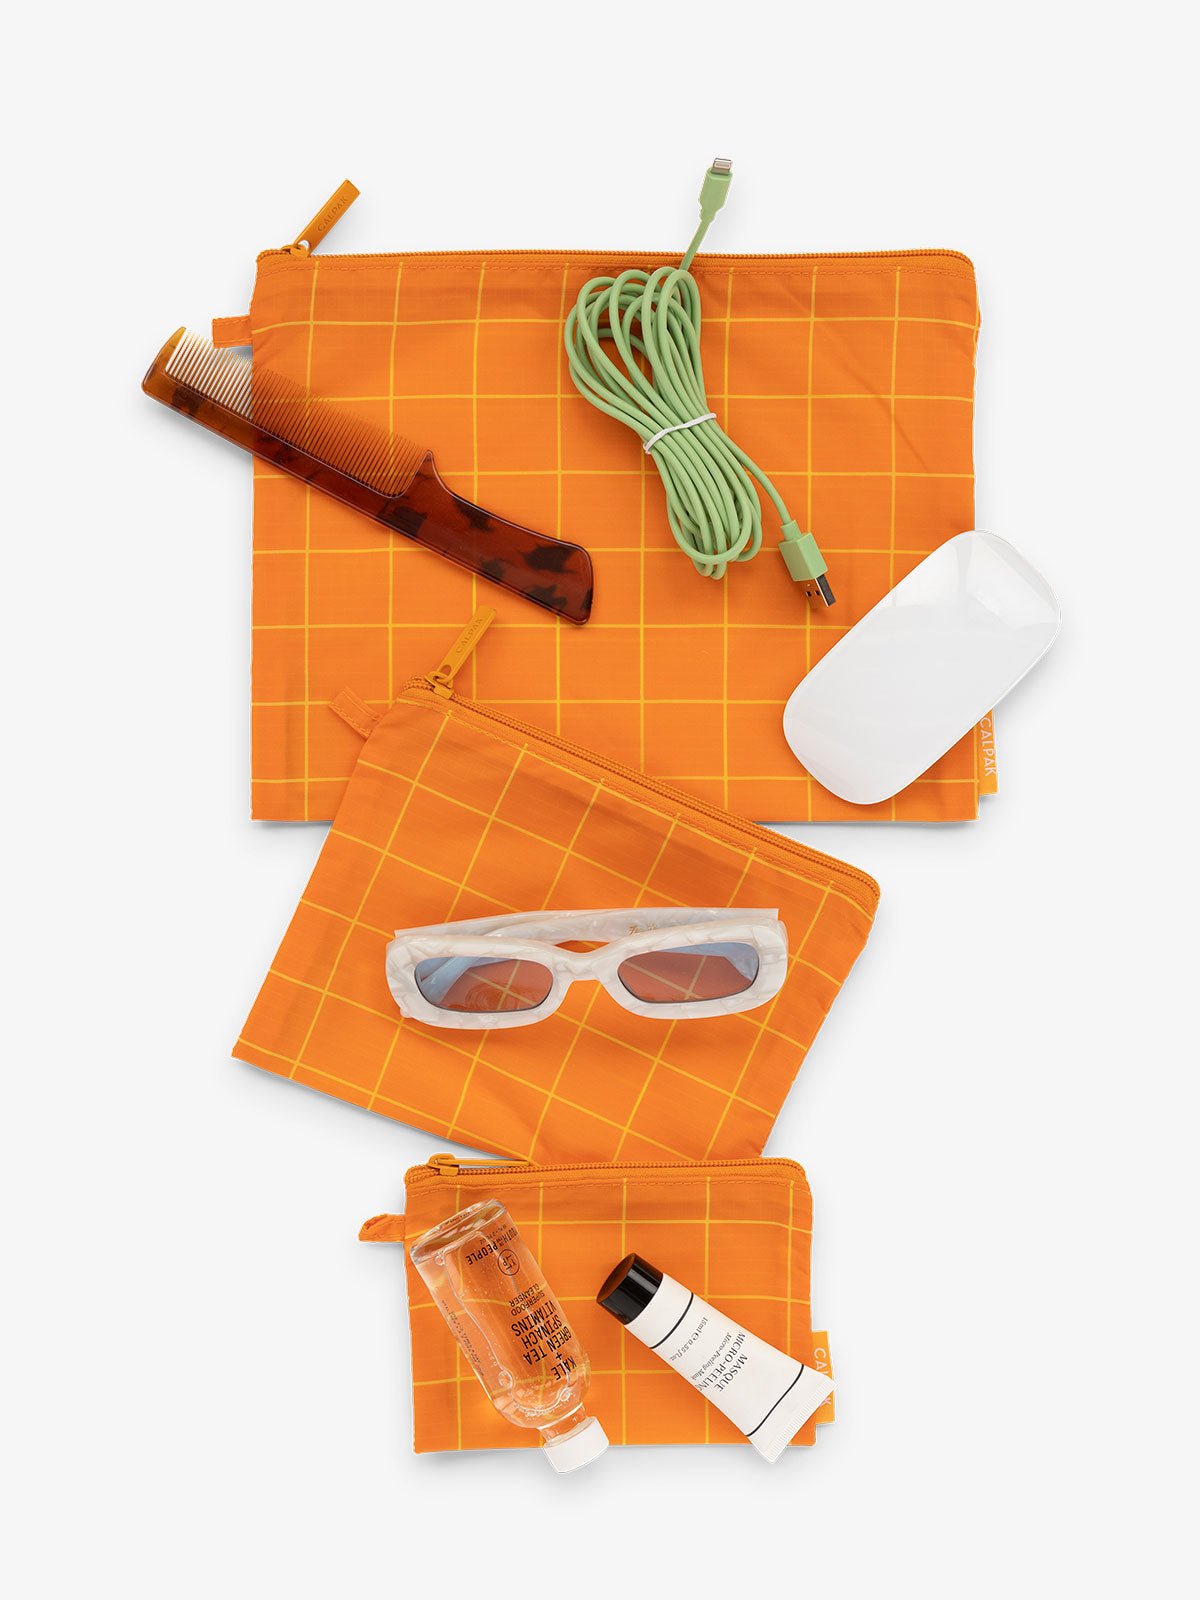 CALPAK Compakt 3 piece zippered pouch set in 3 sizes with water resistant material in orange grid